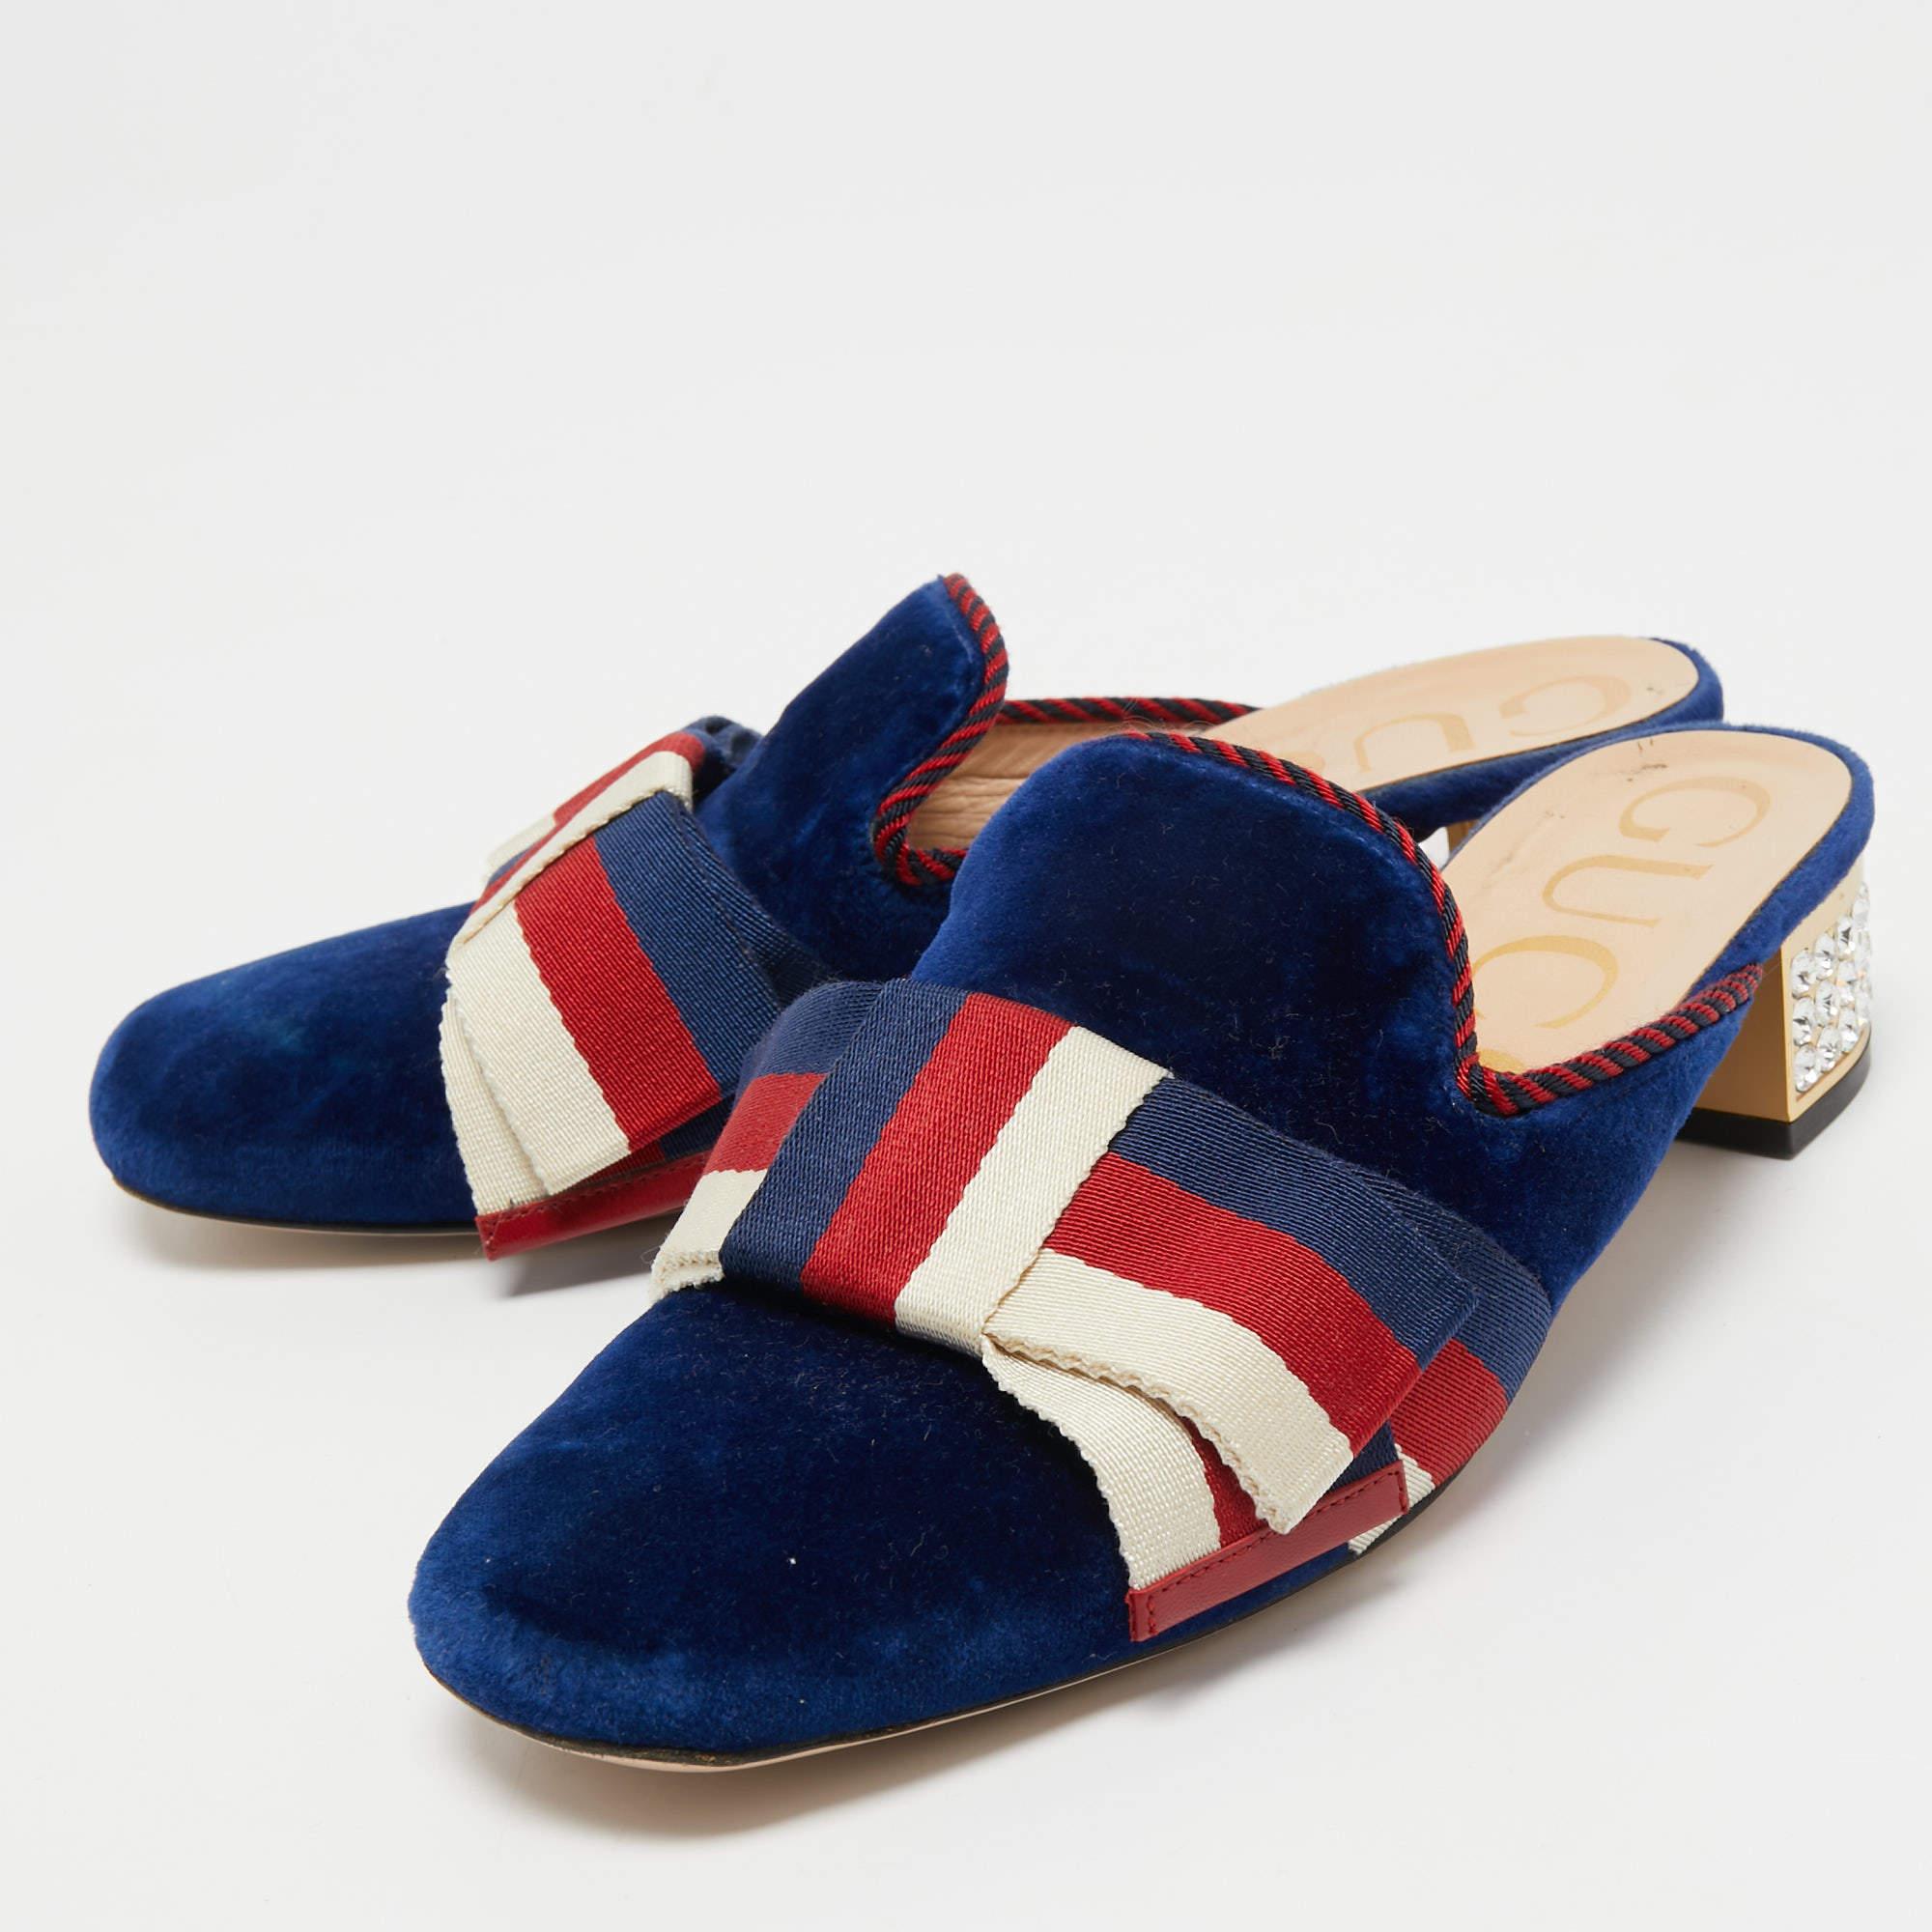 Gucci Blue/Red Velvet Sylvie Bow Mules Size 36 1